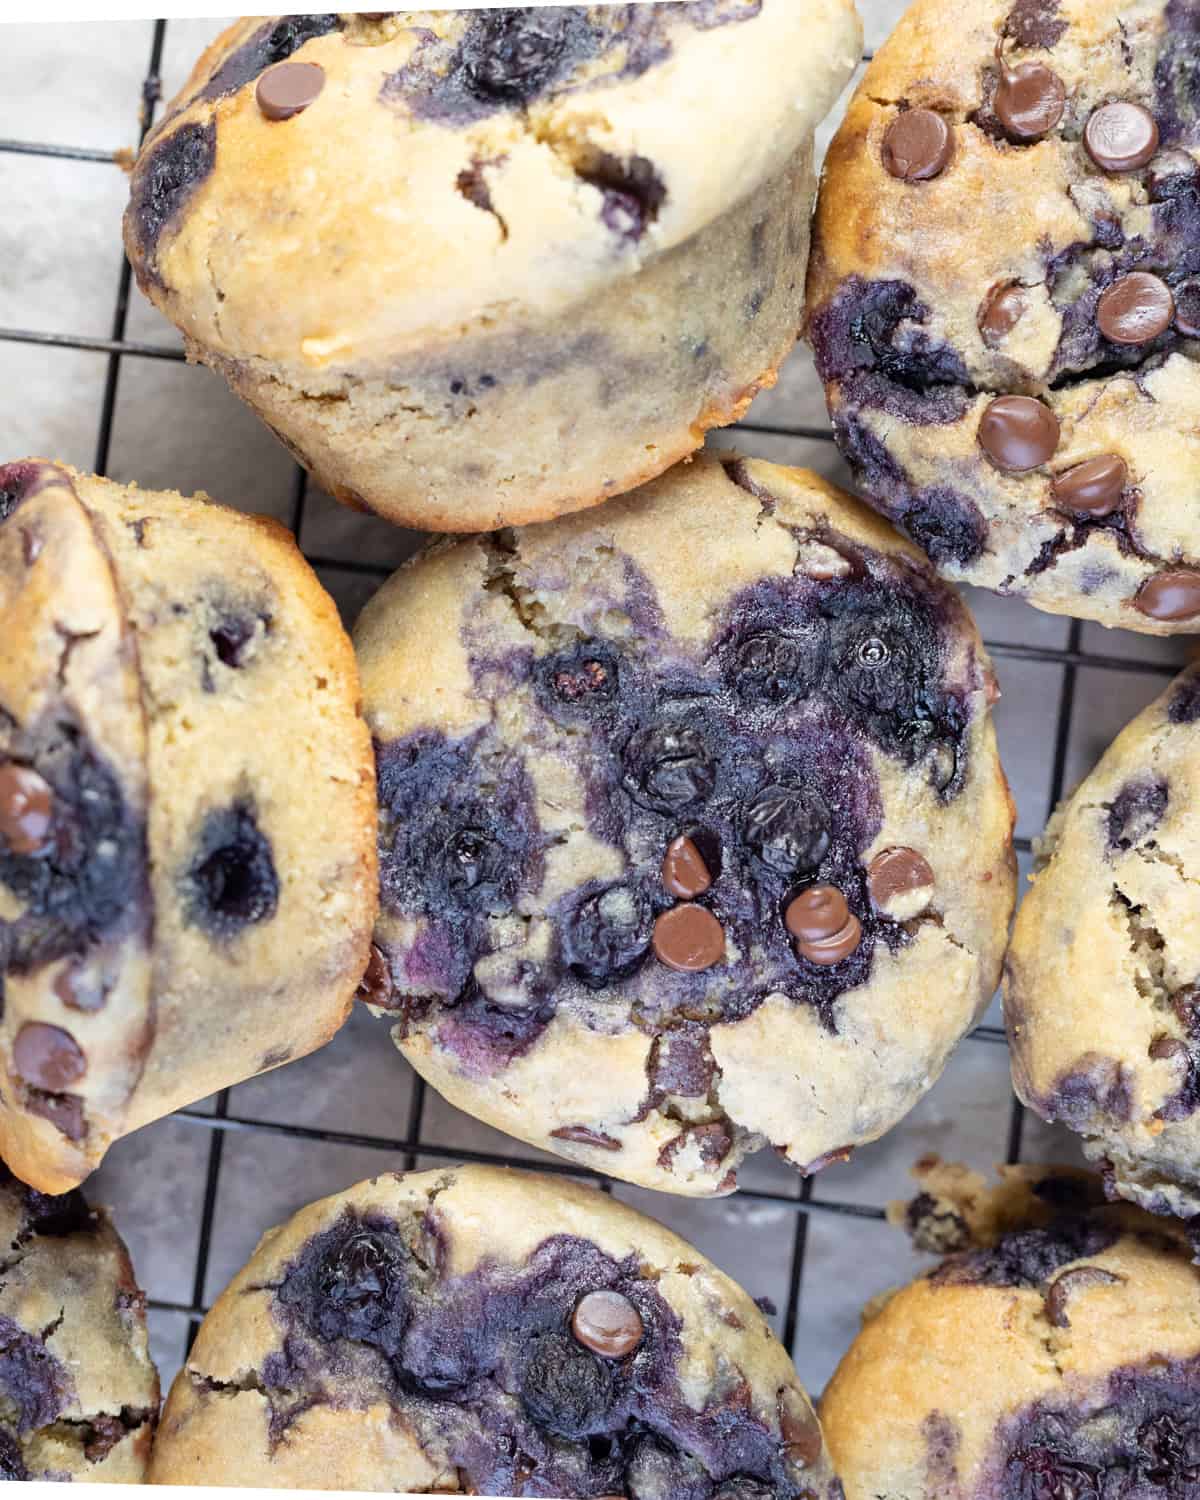 Overhead view of blueberry chocolate chip muffins on a wire cooling rack, highlighting the golden-brown tops and chocolate chip details.